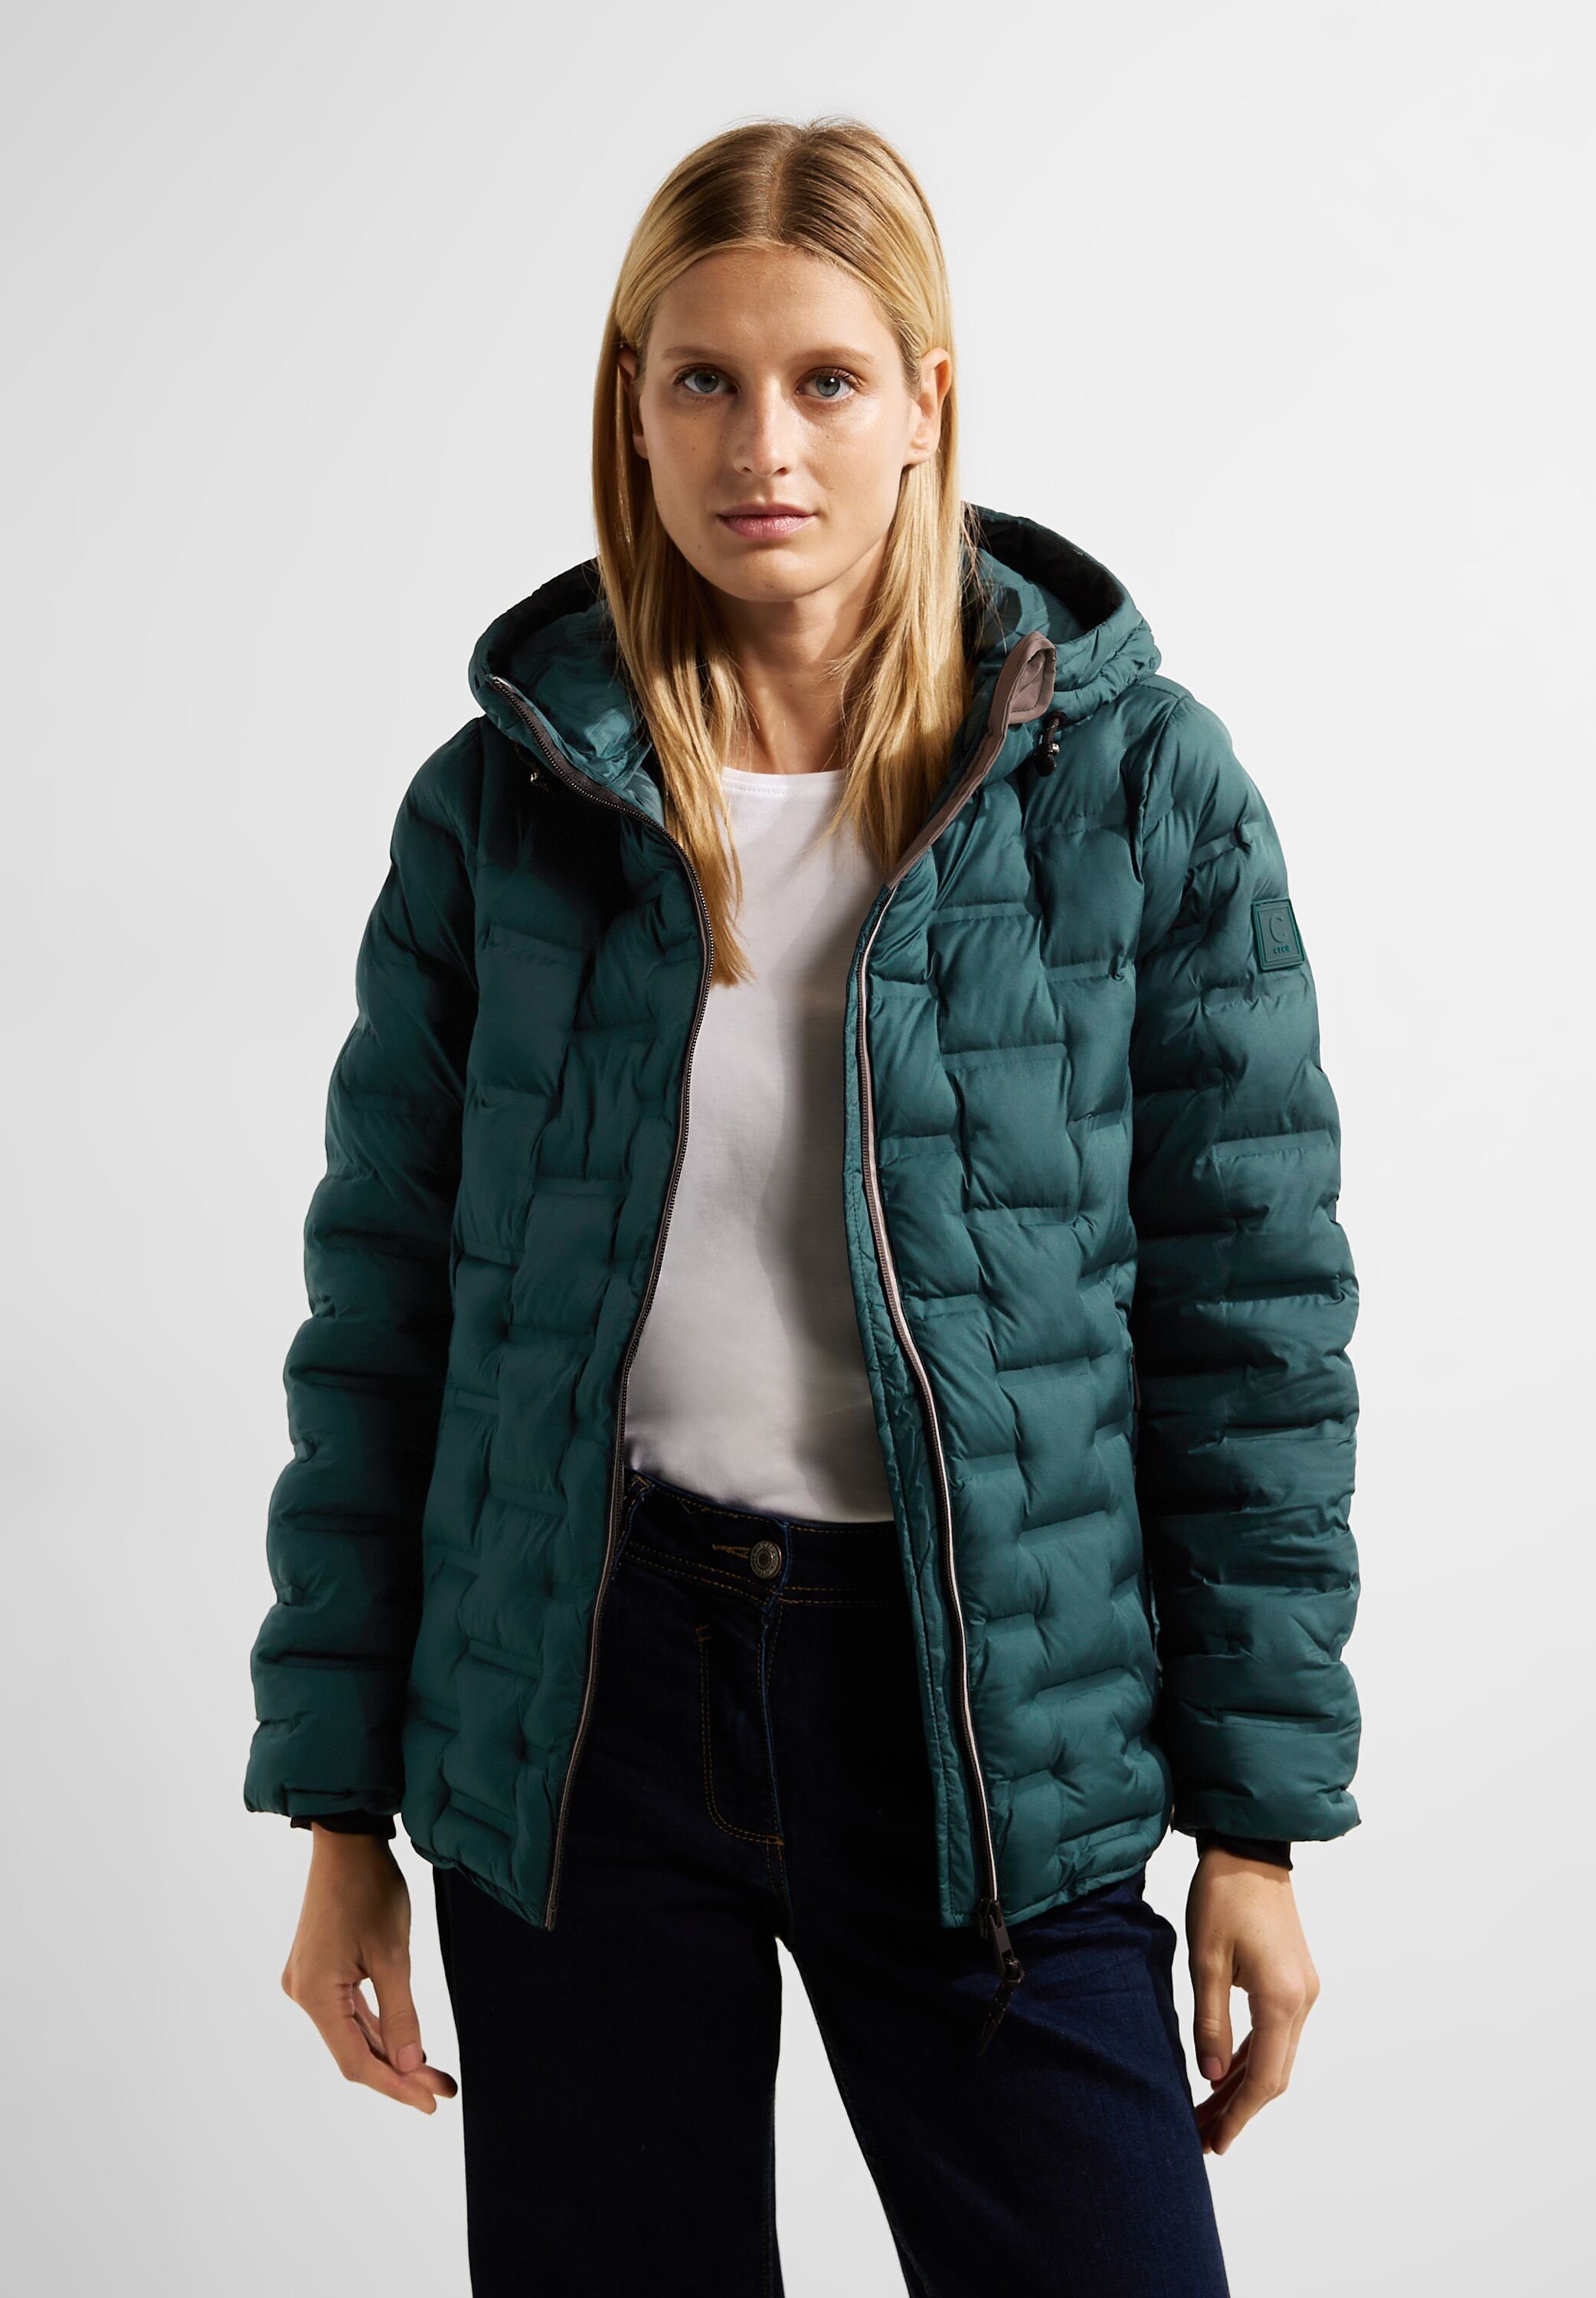 Cecil Outdoorjacke night forest green